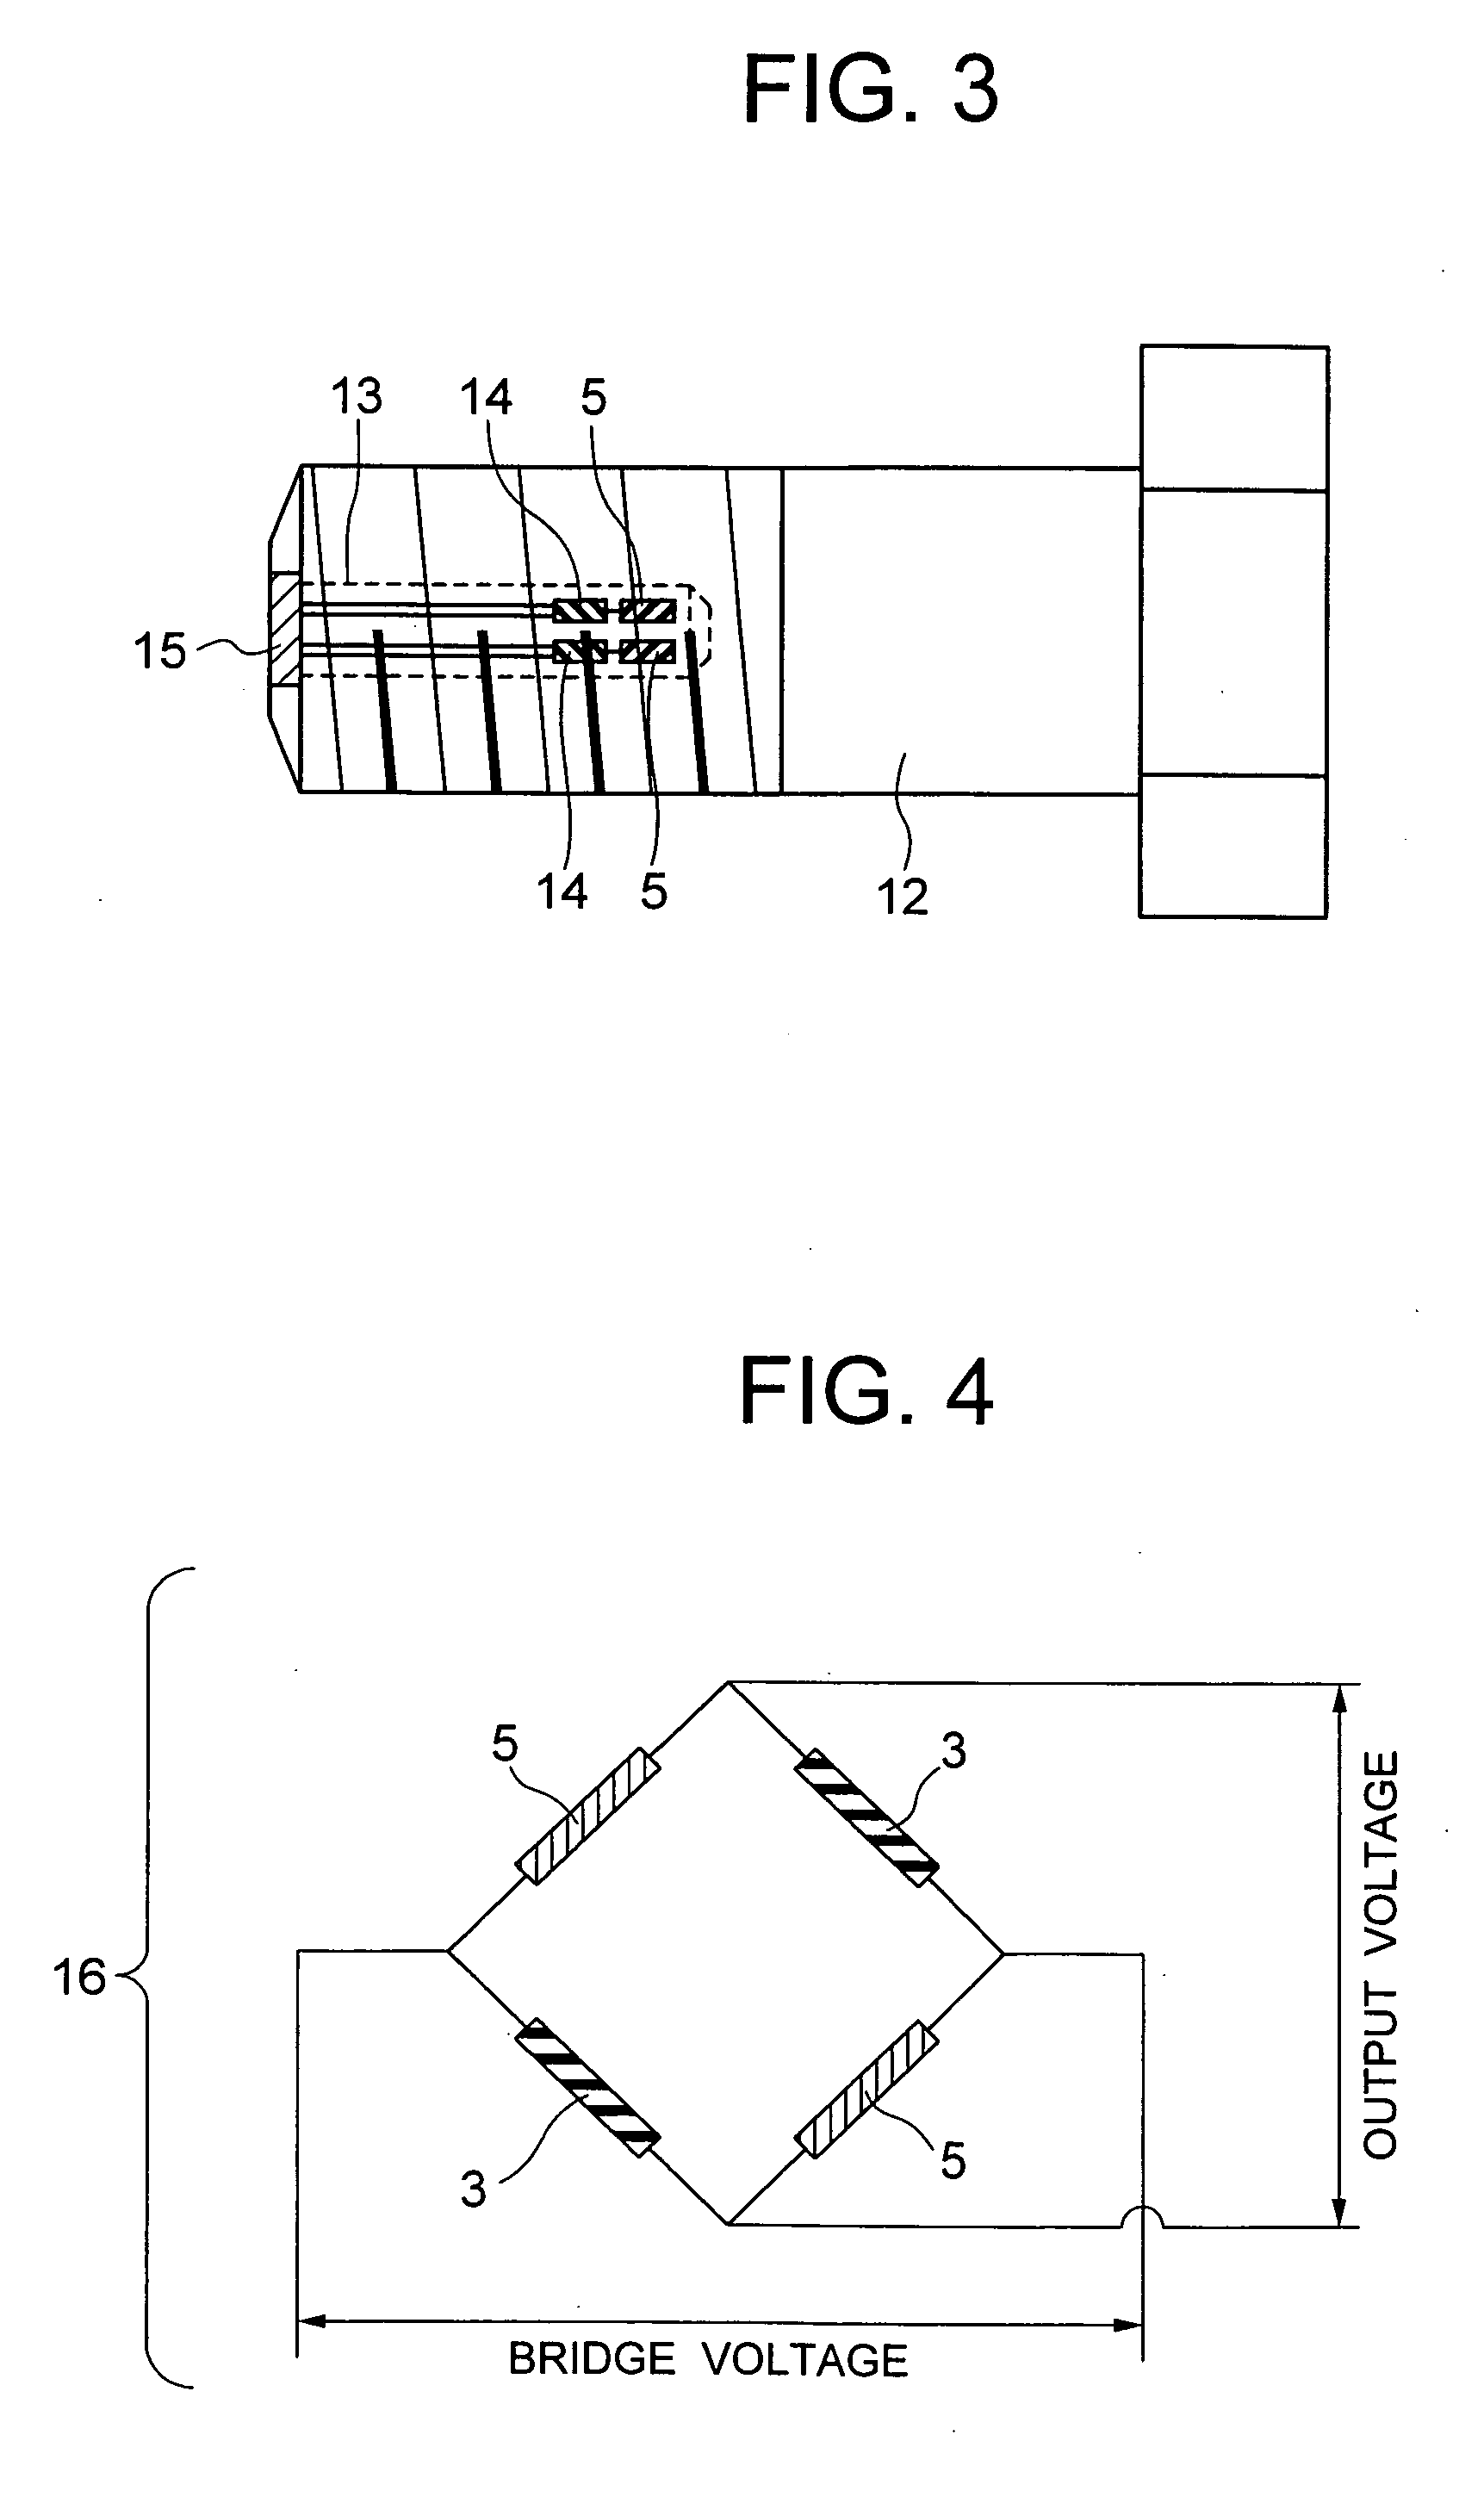 Bolt with function of measuring strain